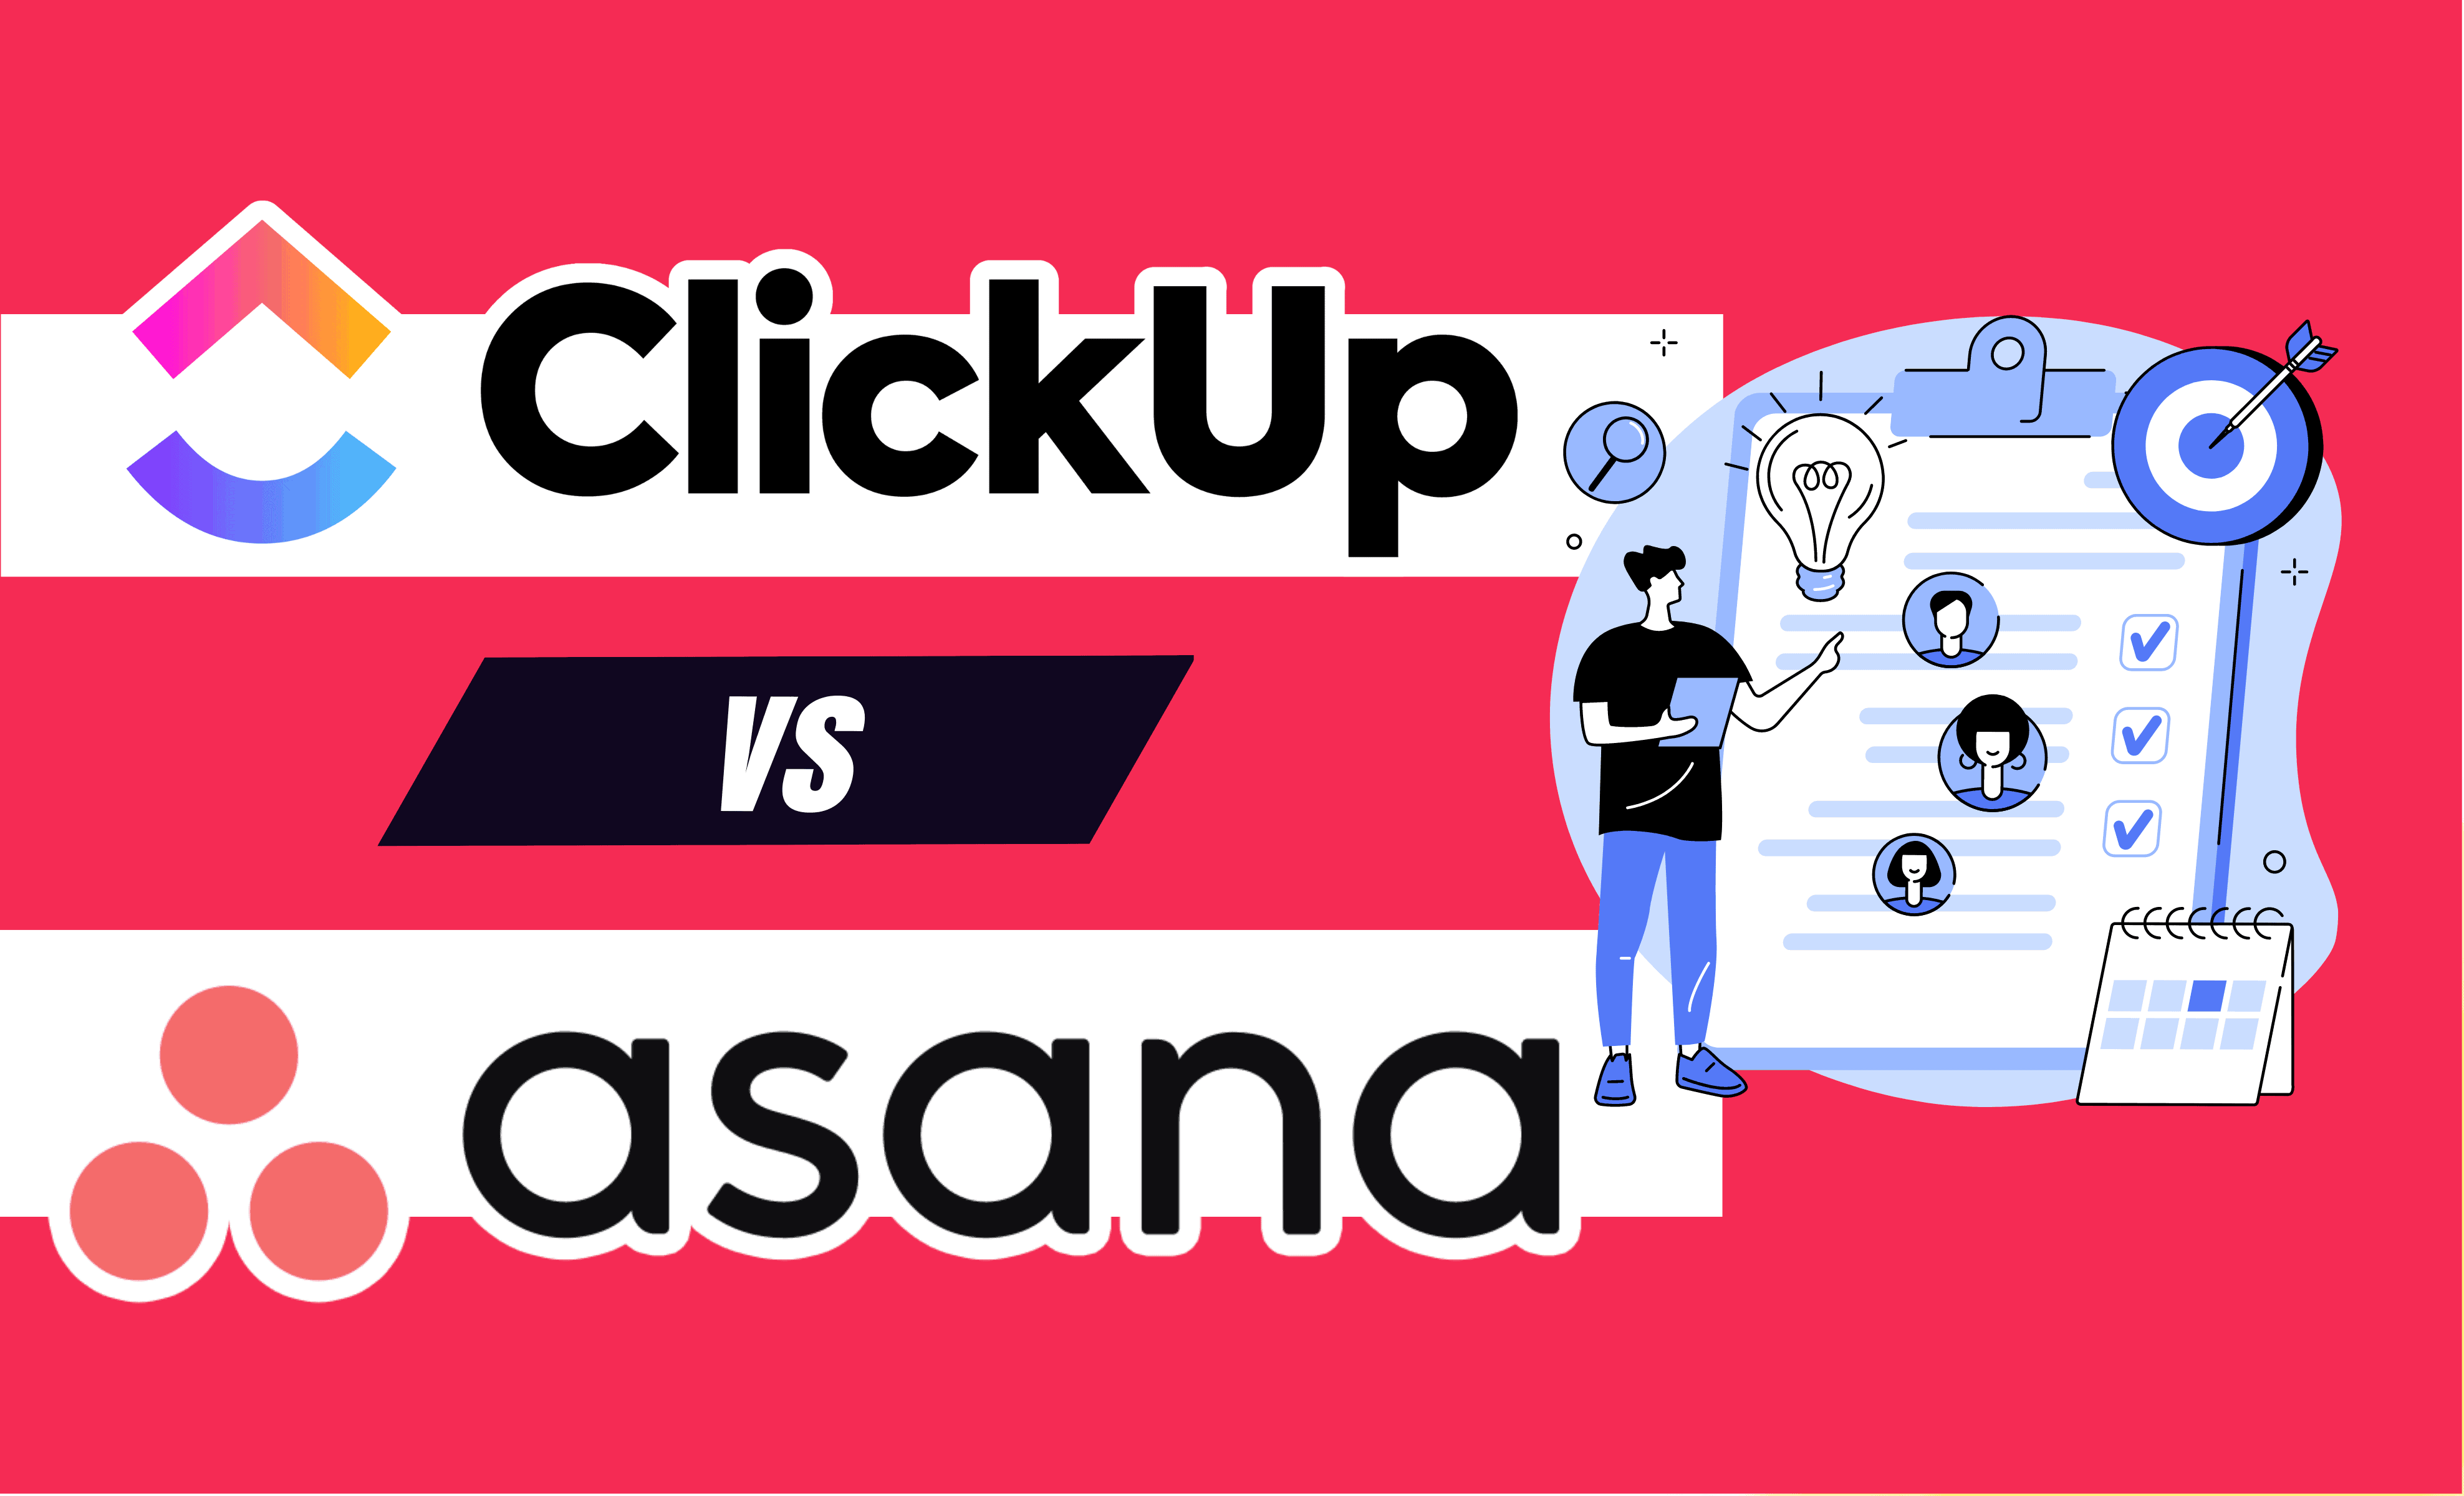 Asana Vs Clickup: Which Tool is Better?